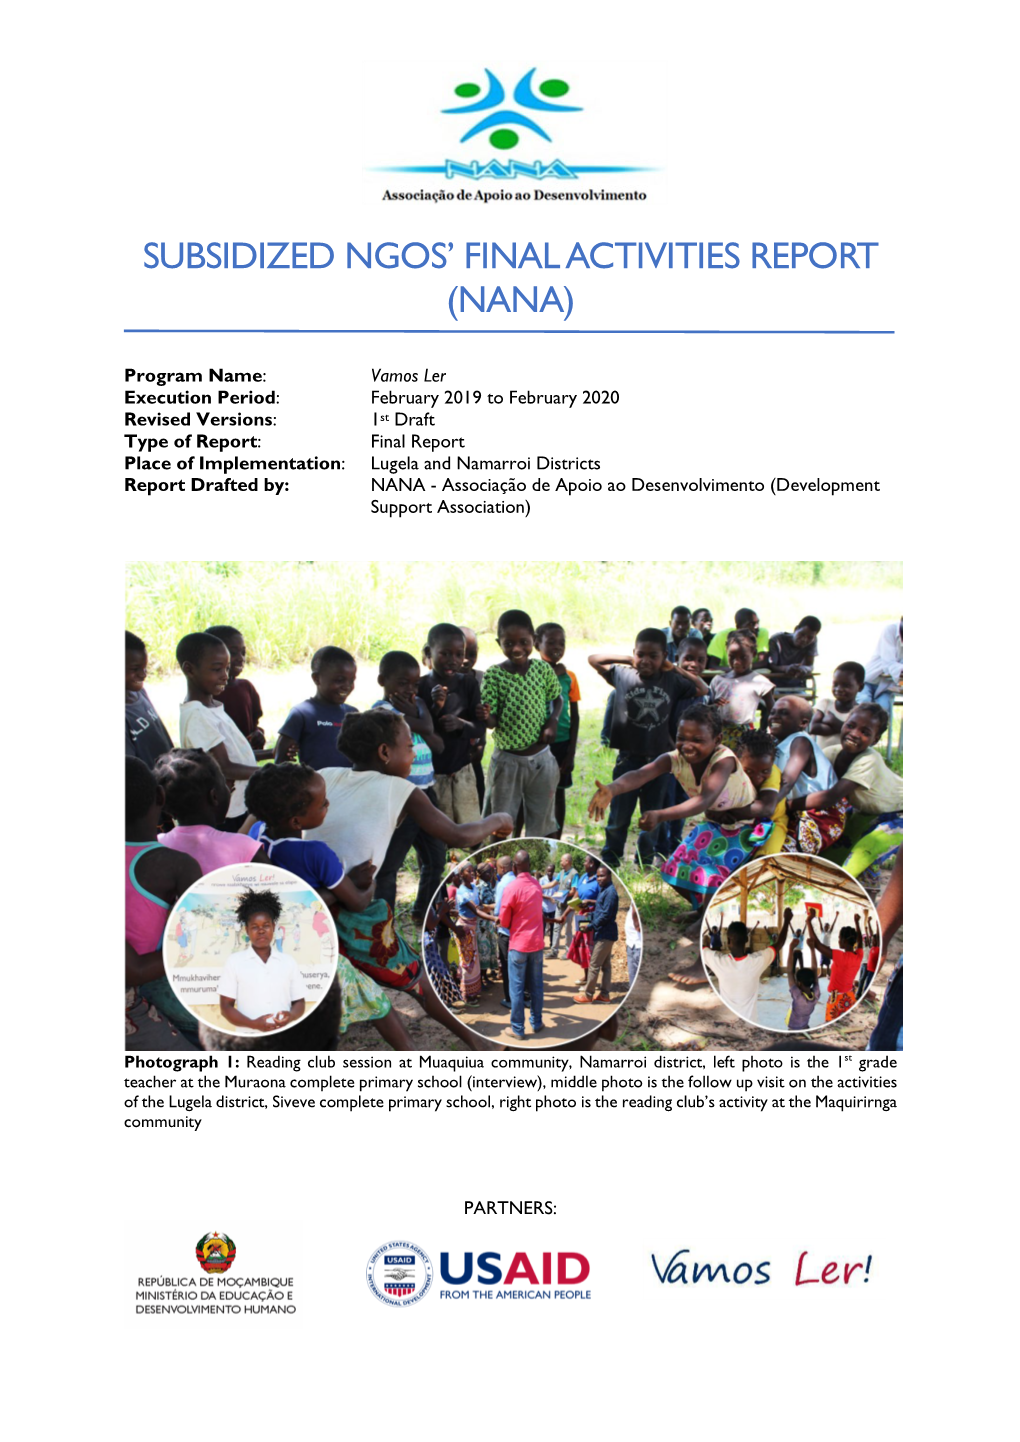 Subsidized Ngos' Final Activities Report